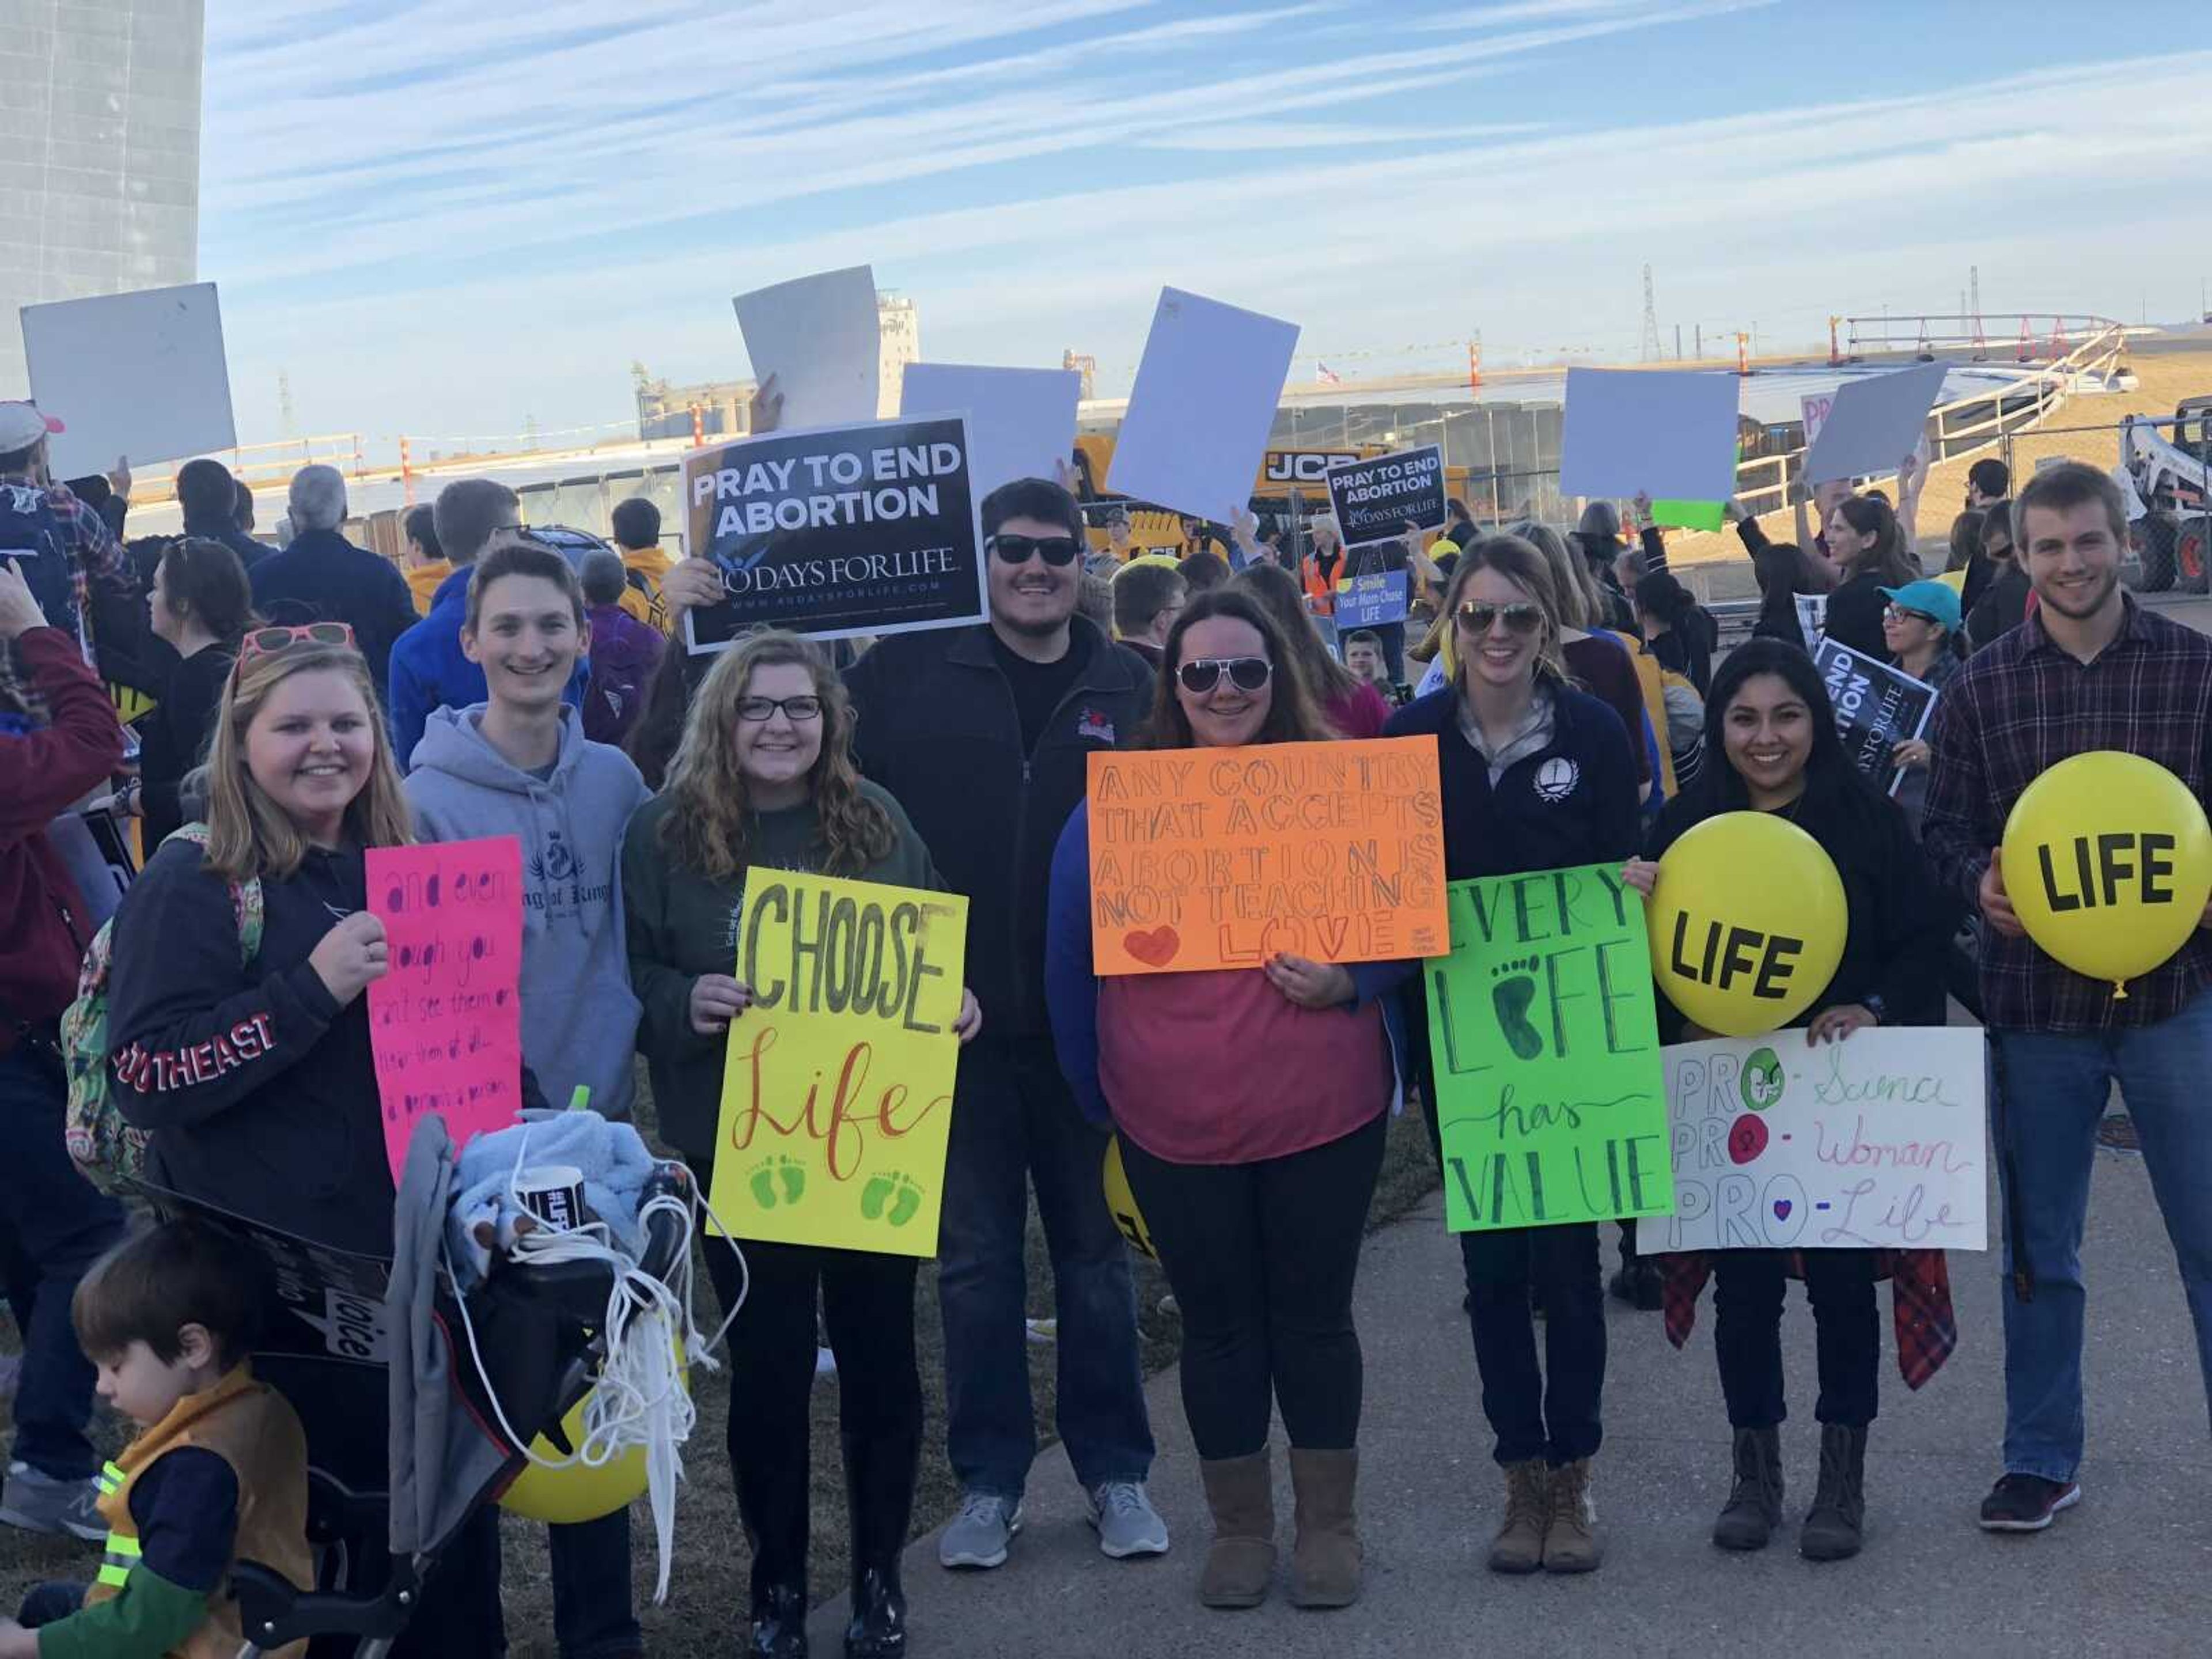 Students for Life travel to St. Louis to march against abortion